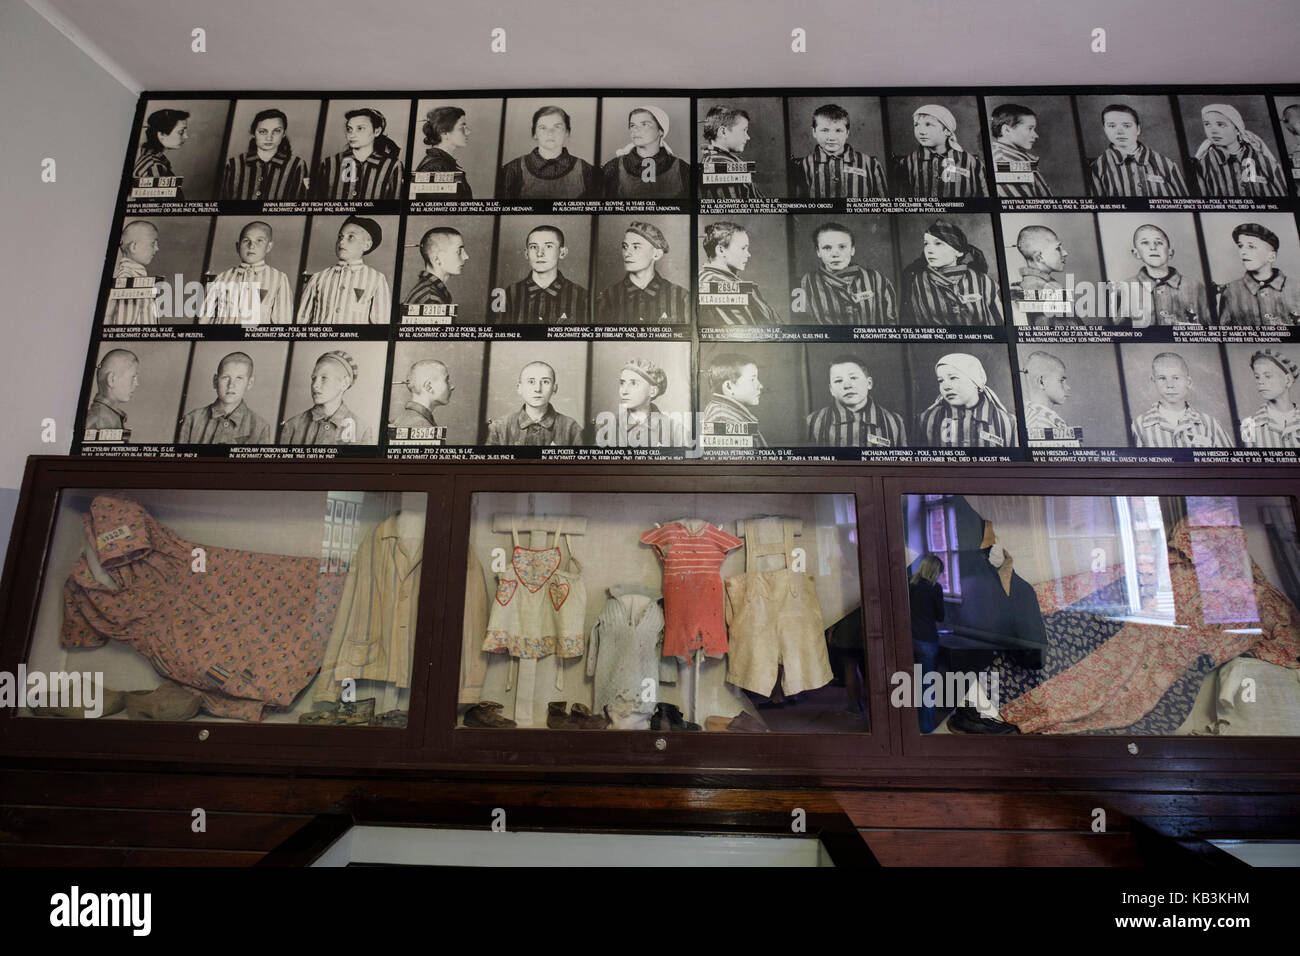 Portraits of prisoners at the Auschwitz WWII Nazi concentration camp museum, Poland Stock Photo